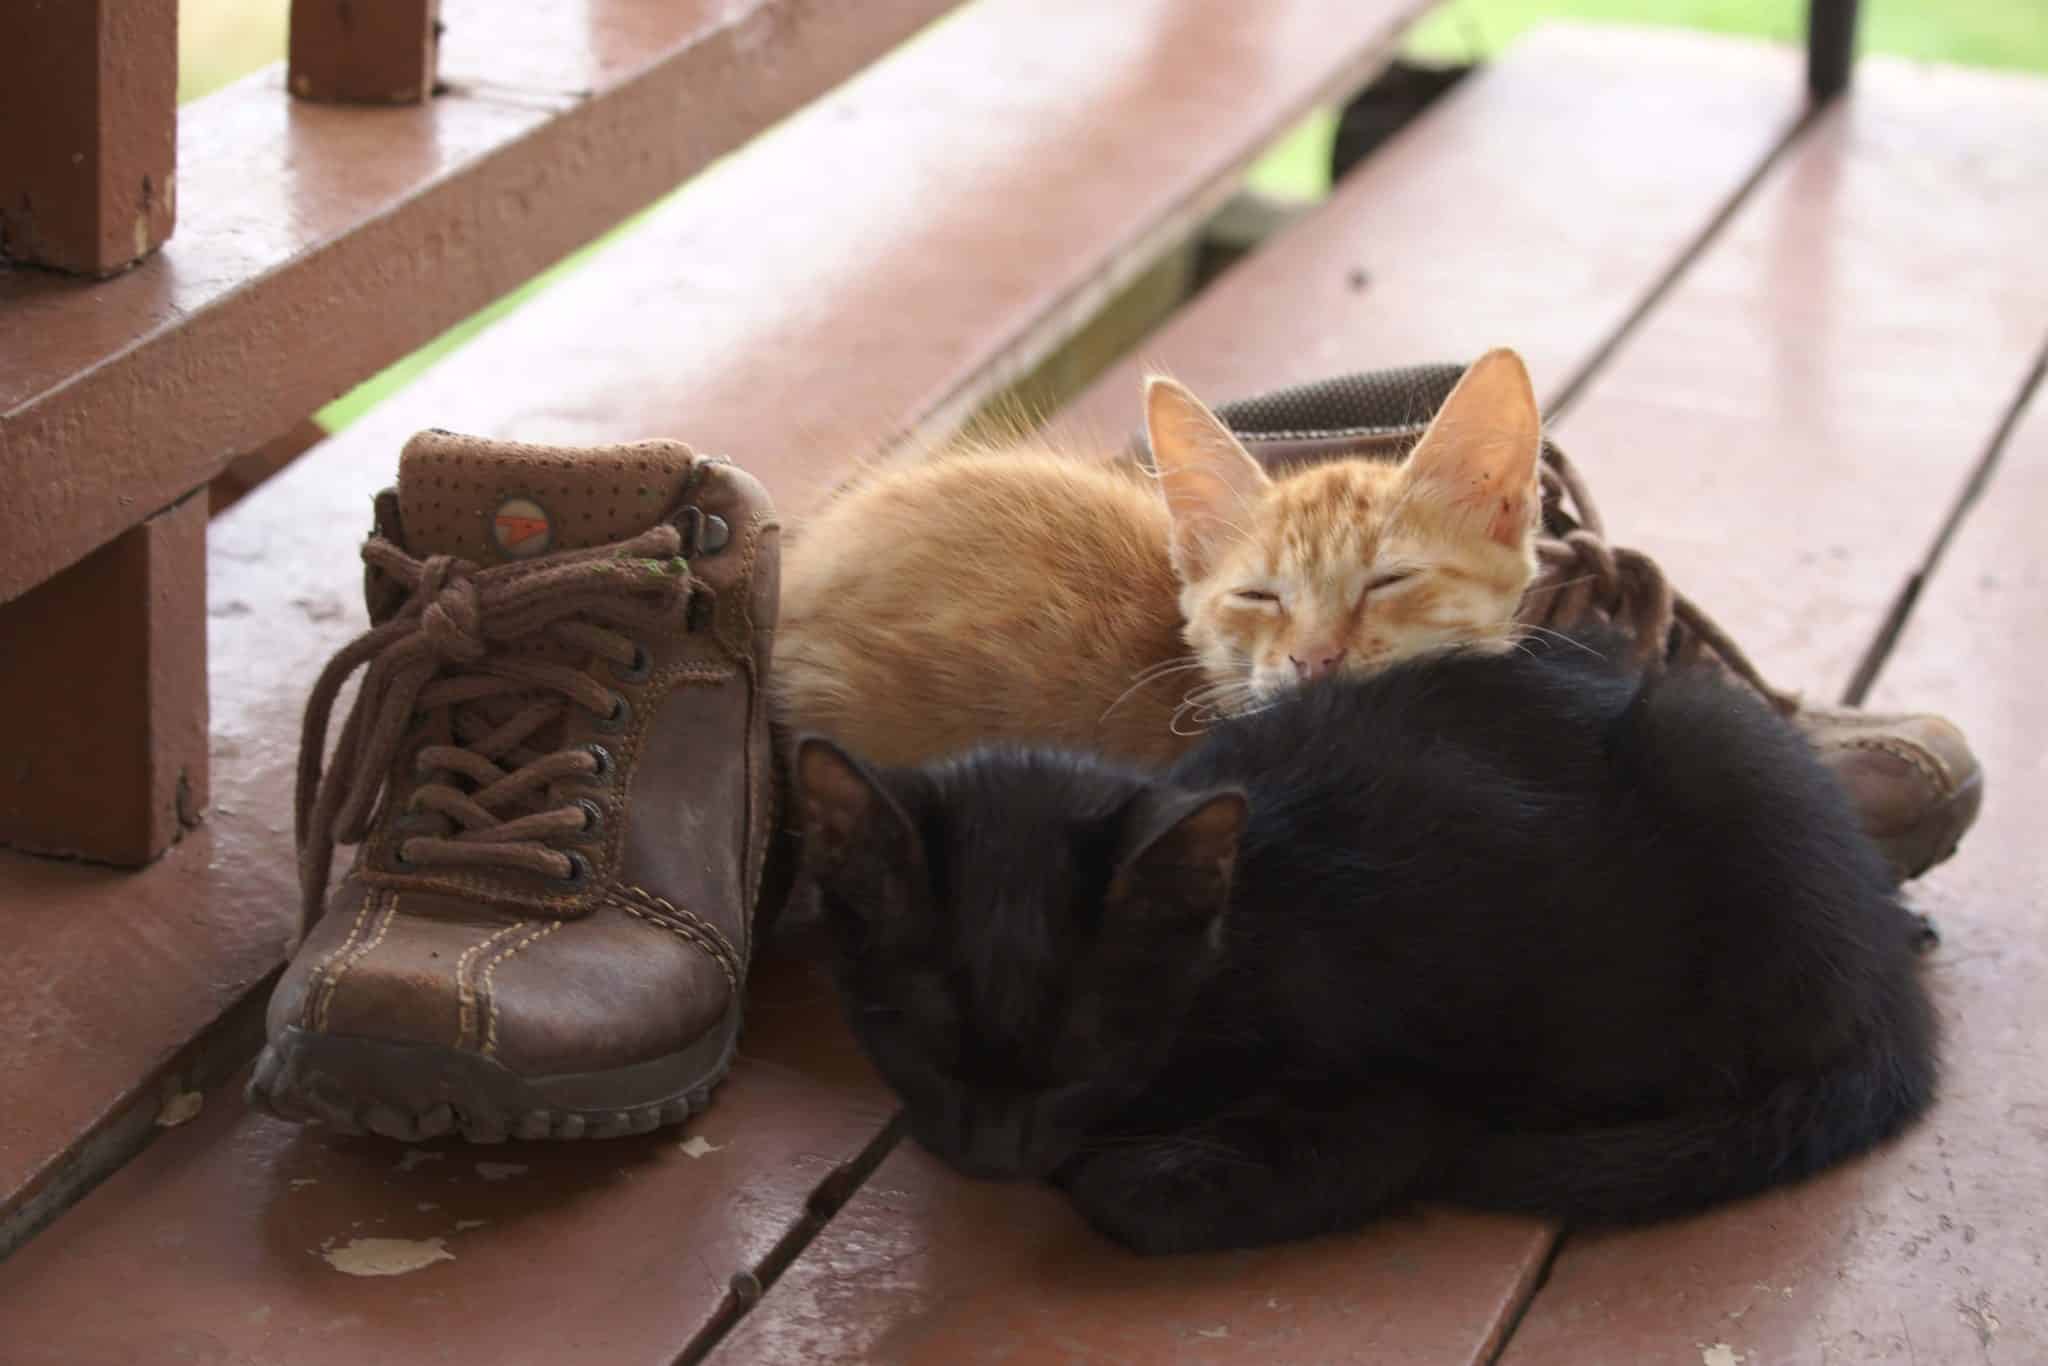 cats sleeping near leather boots